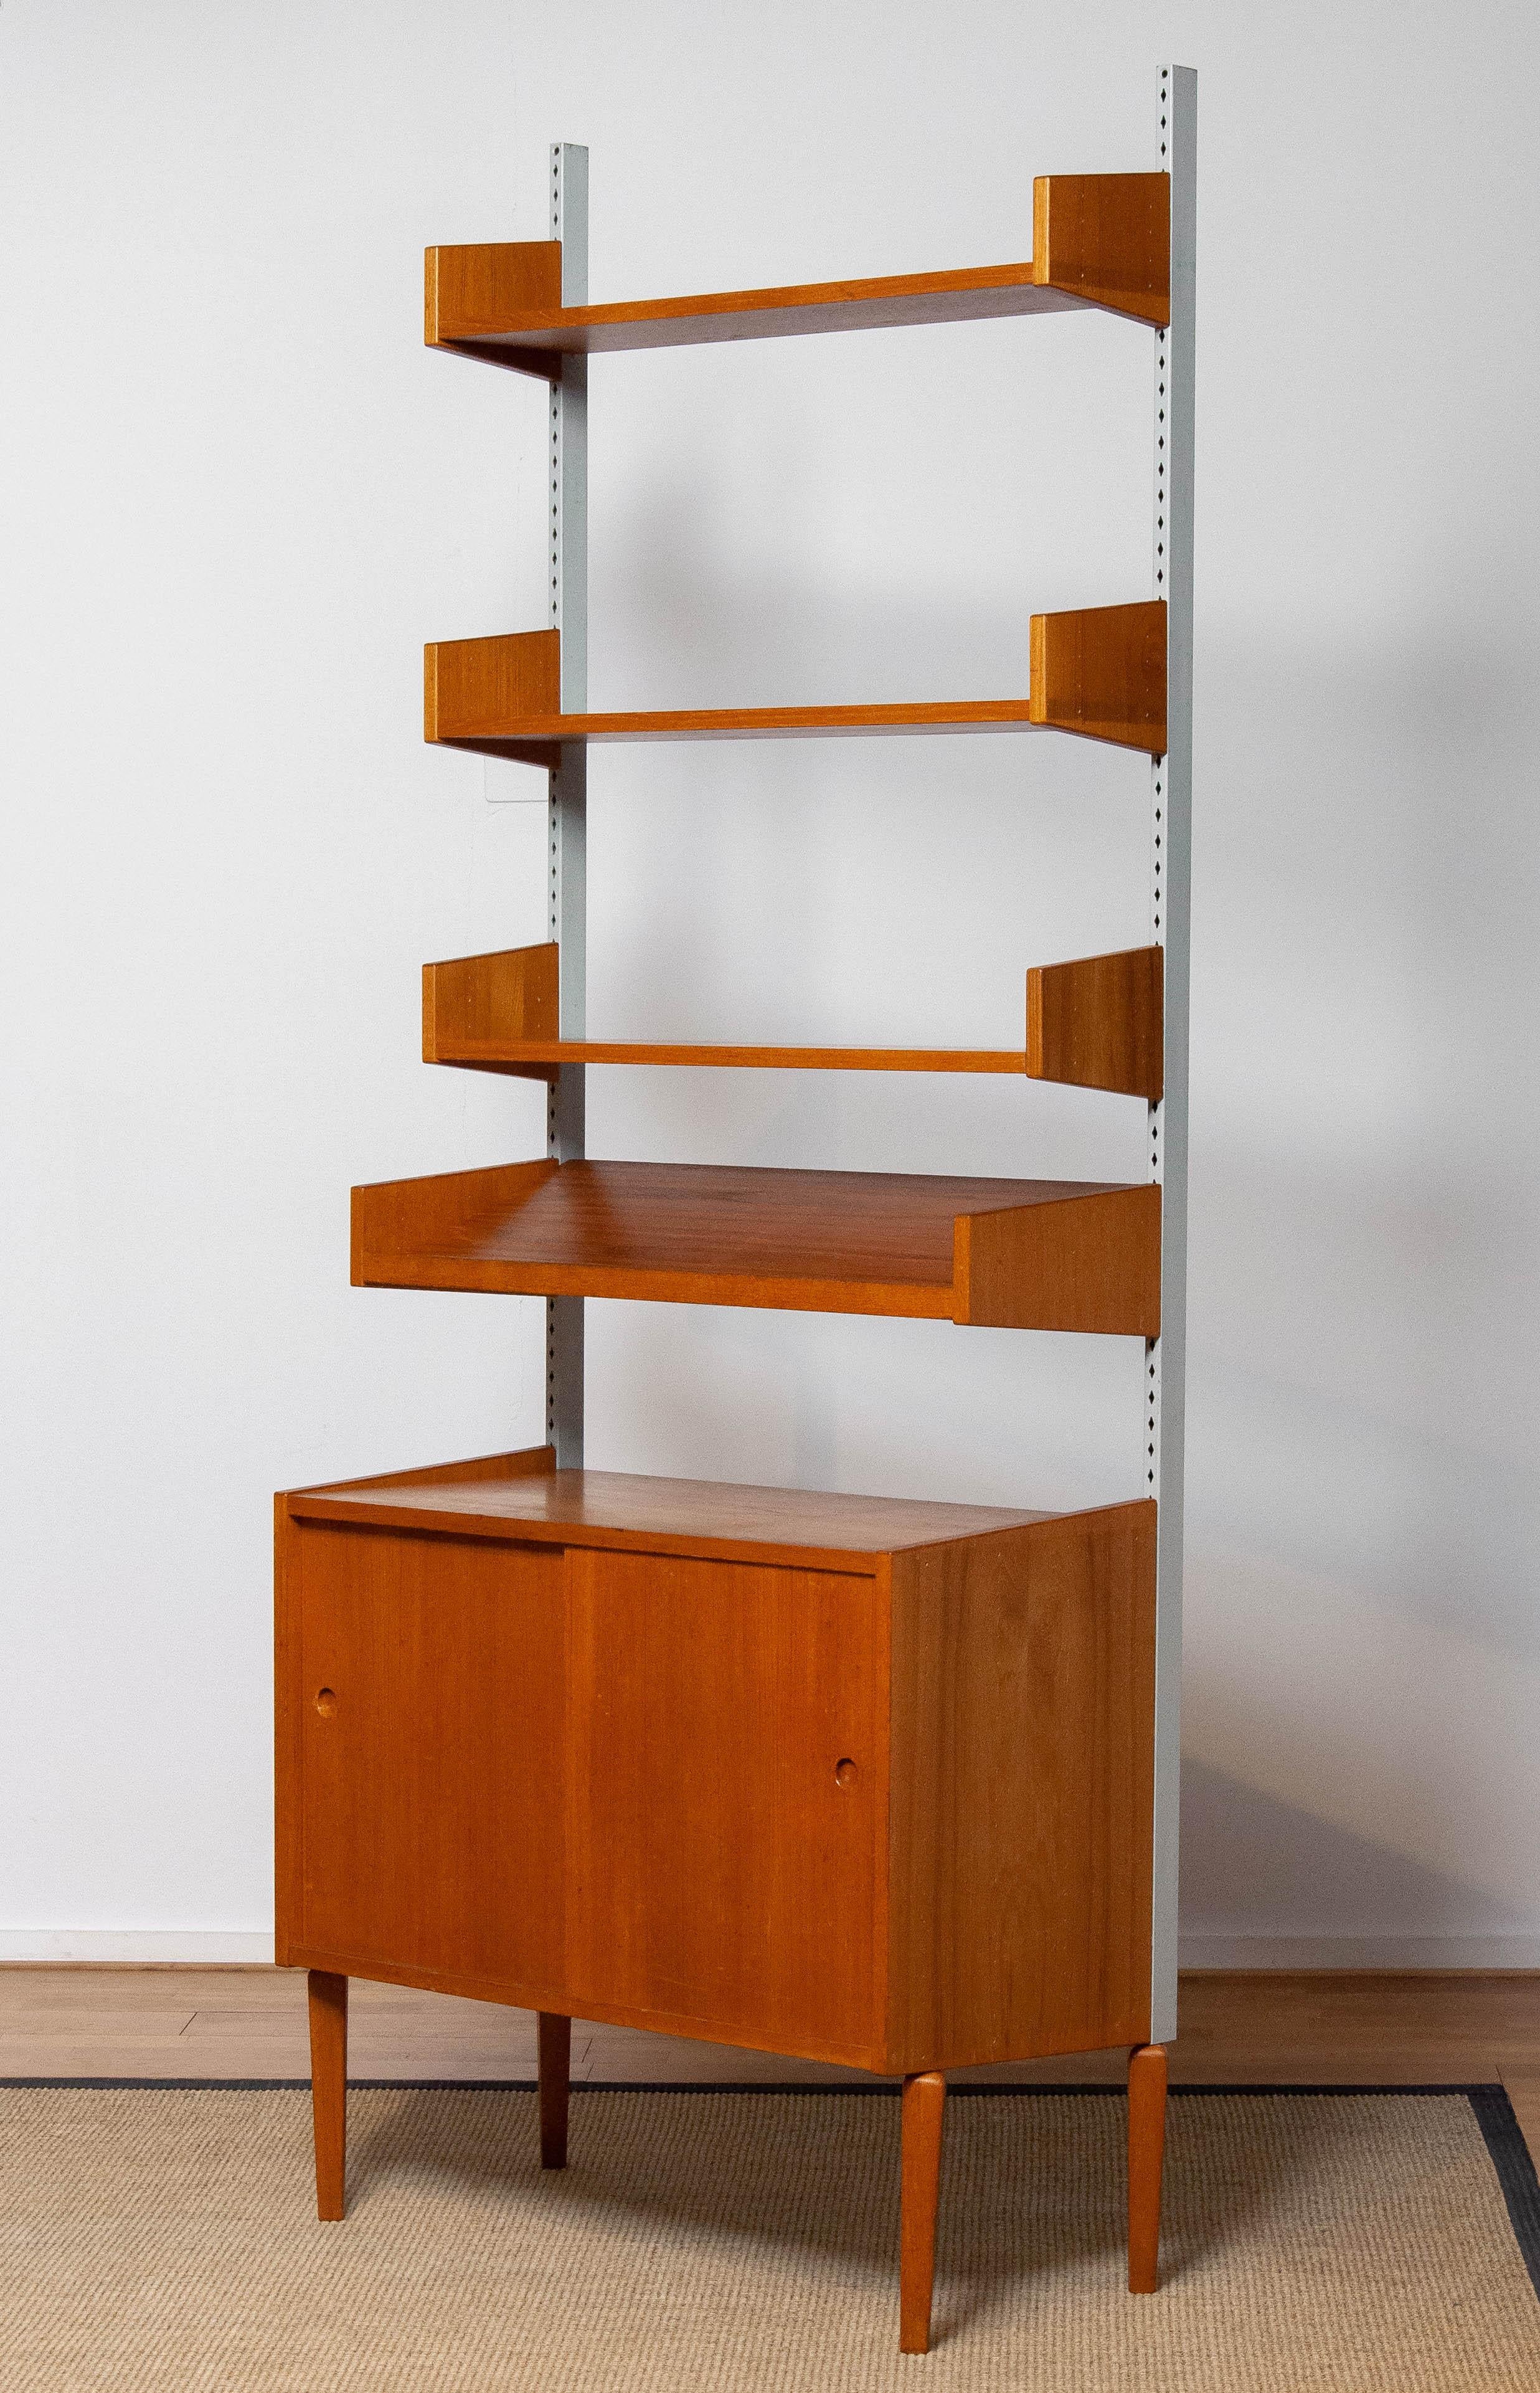 Mid-20th Century Teak Shelf System / Bookcase In Teak With Steel Bars By Harald Lundqvist 1950's